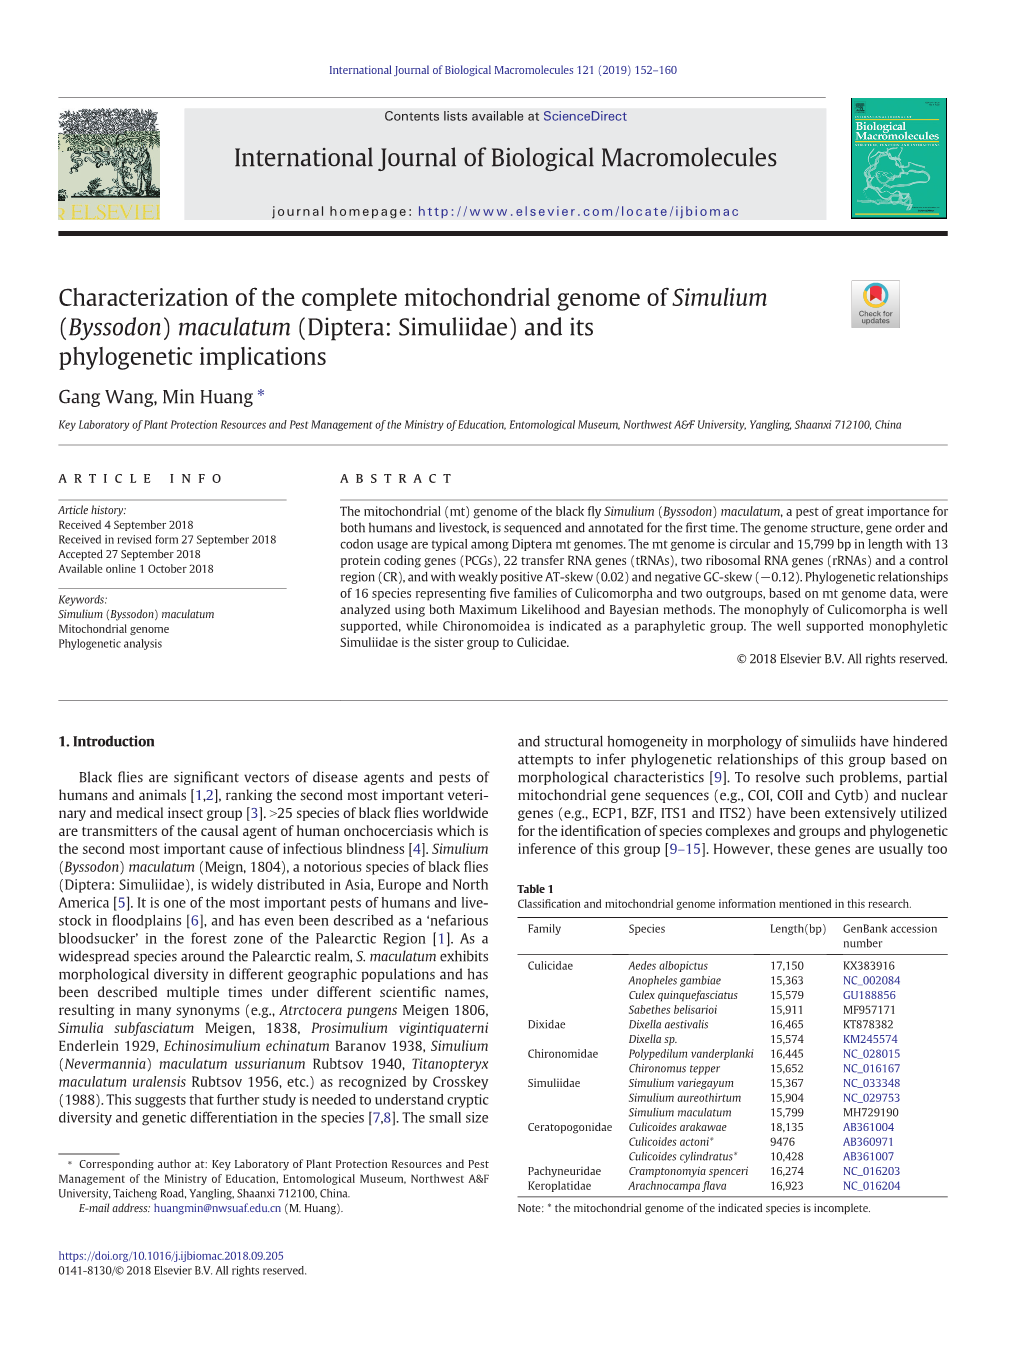 Characterization of the Complete Mitochondrial Genome of Simulium (Byssodon) Maculatum (Diptera: Simuliidae) and Its Phylogenetic Implications